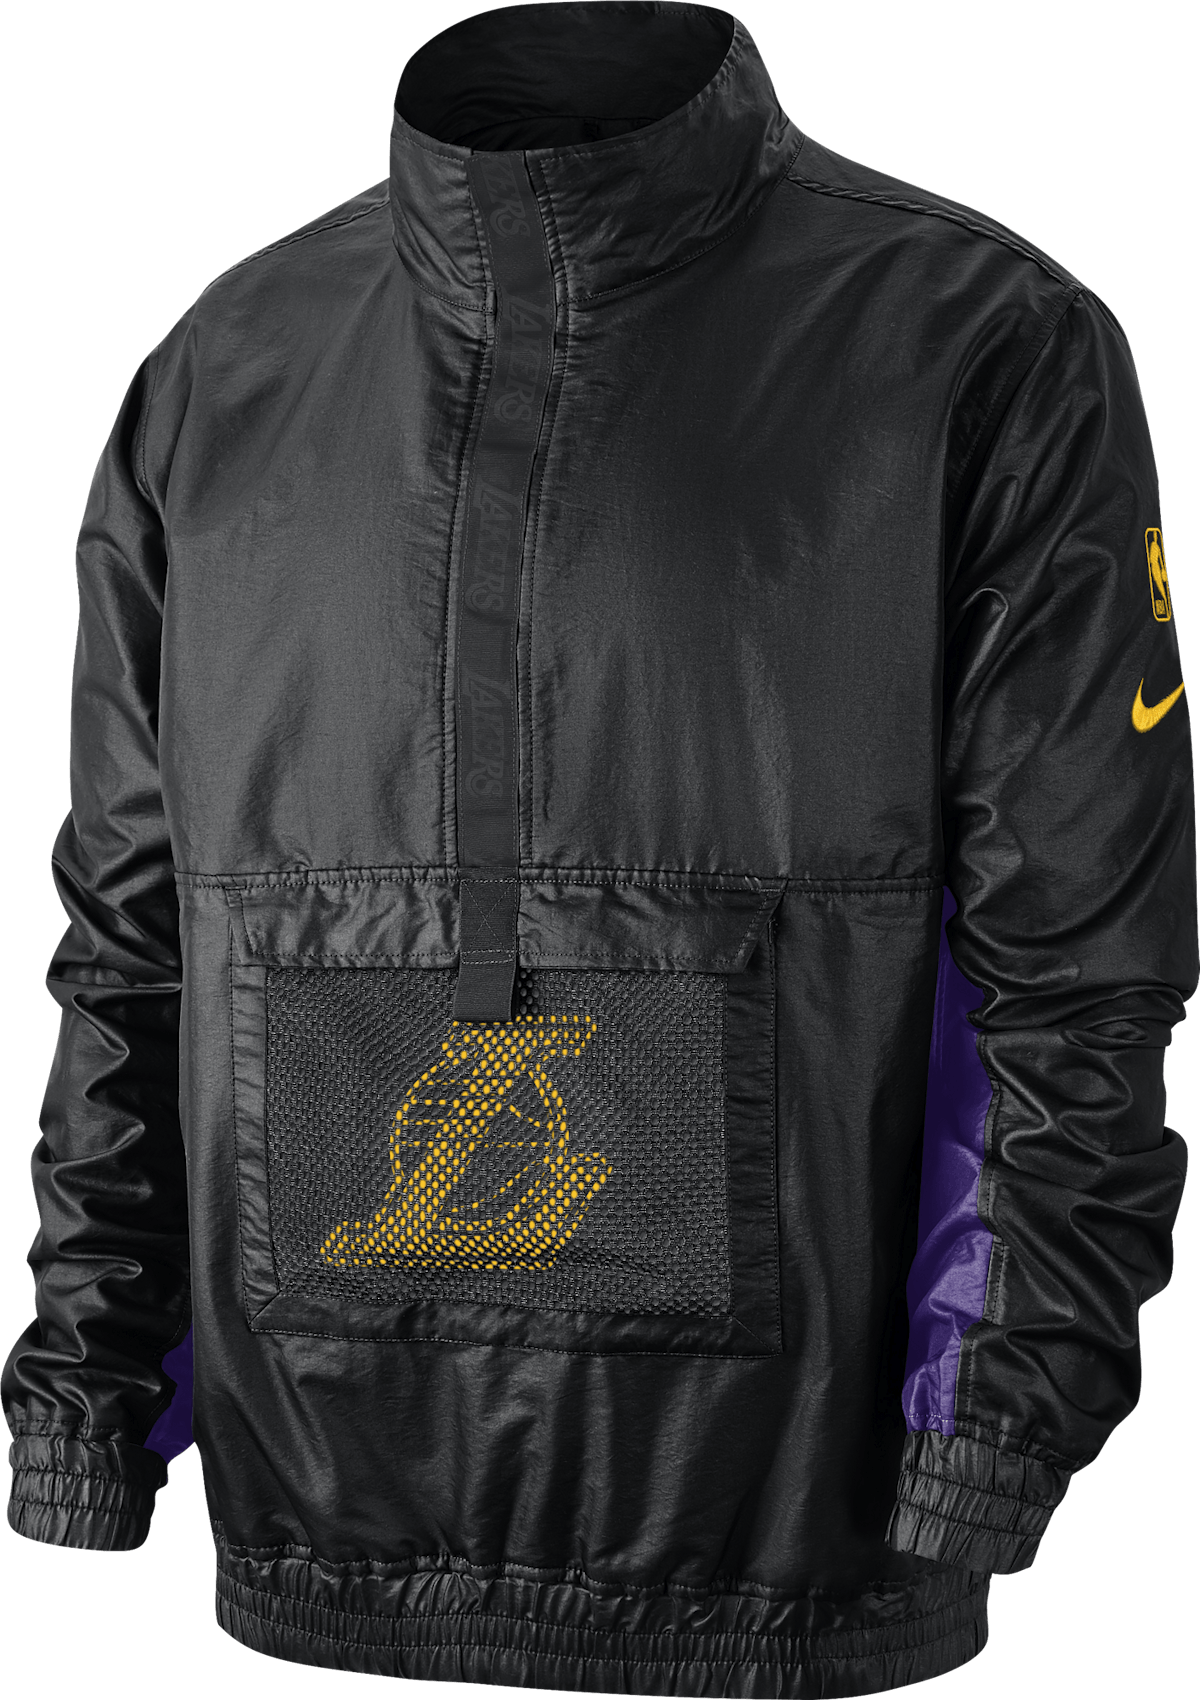 Lakers Courtside Anorak Jacket Field Space